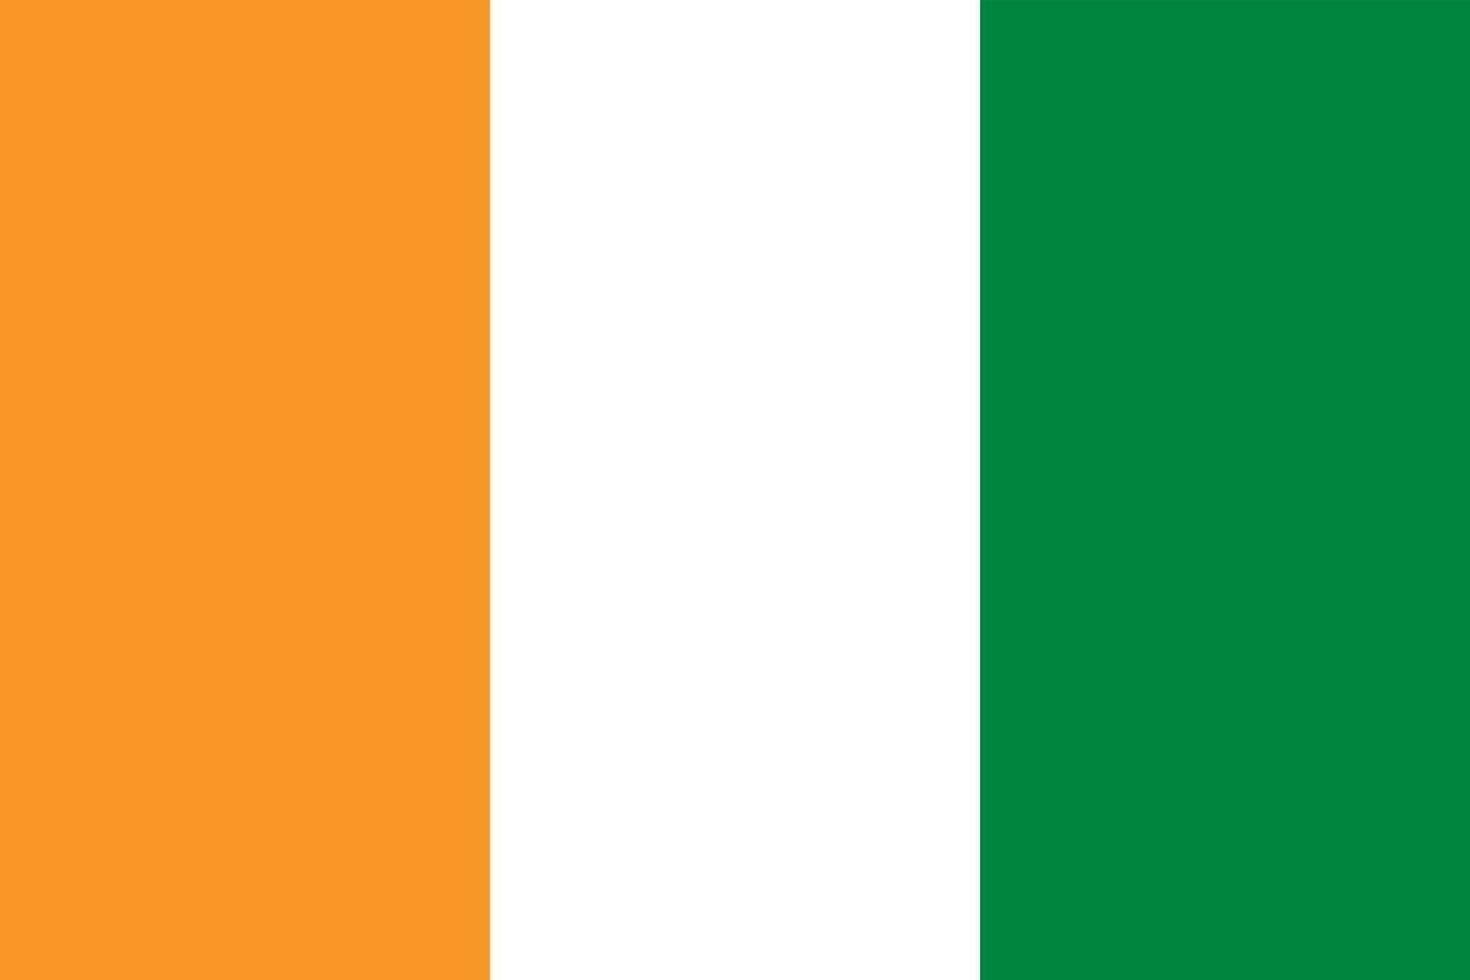 Cote d'Ivoire officially flag vector